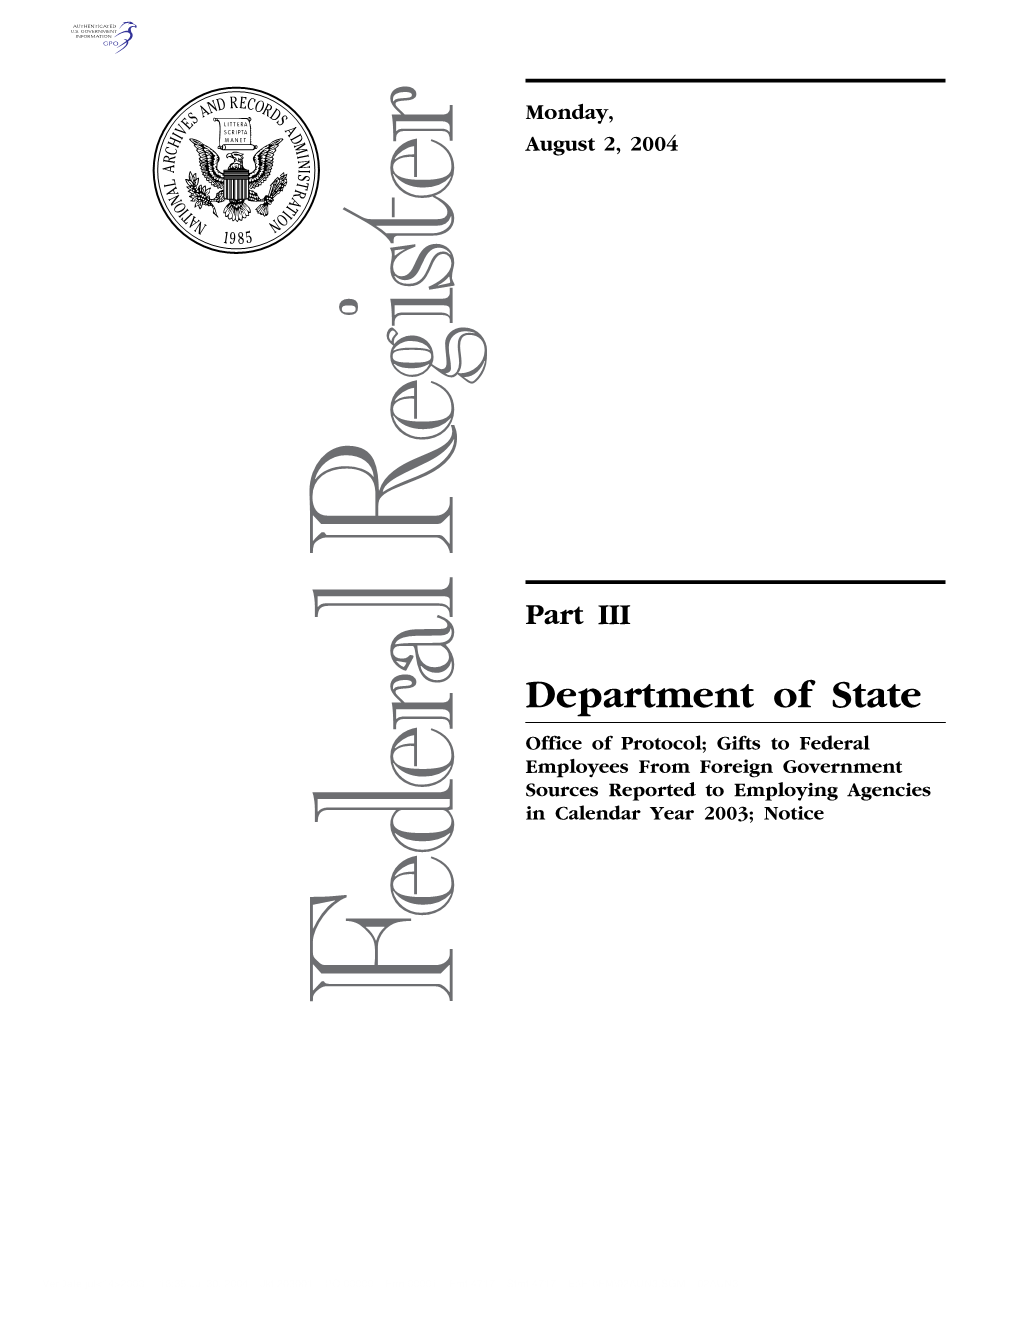 Department of State Office of Protocol; Gifts to Federal Employees from Foreign Government Sources Reported to Employing Agencies in Calendar Year 2003; Notice